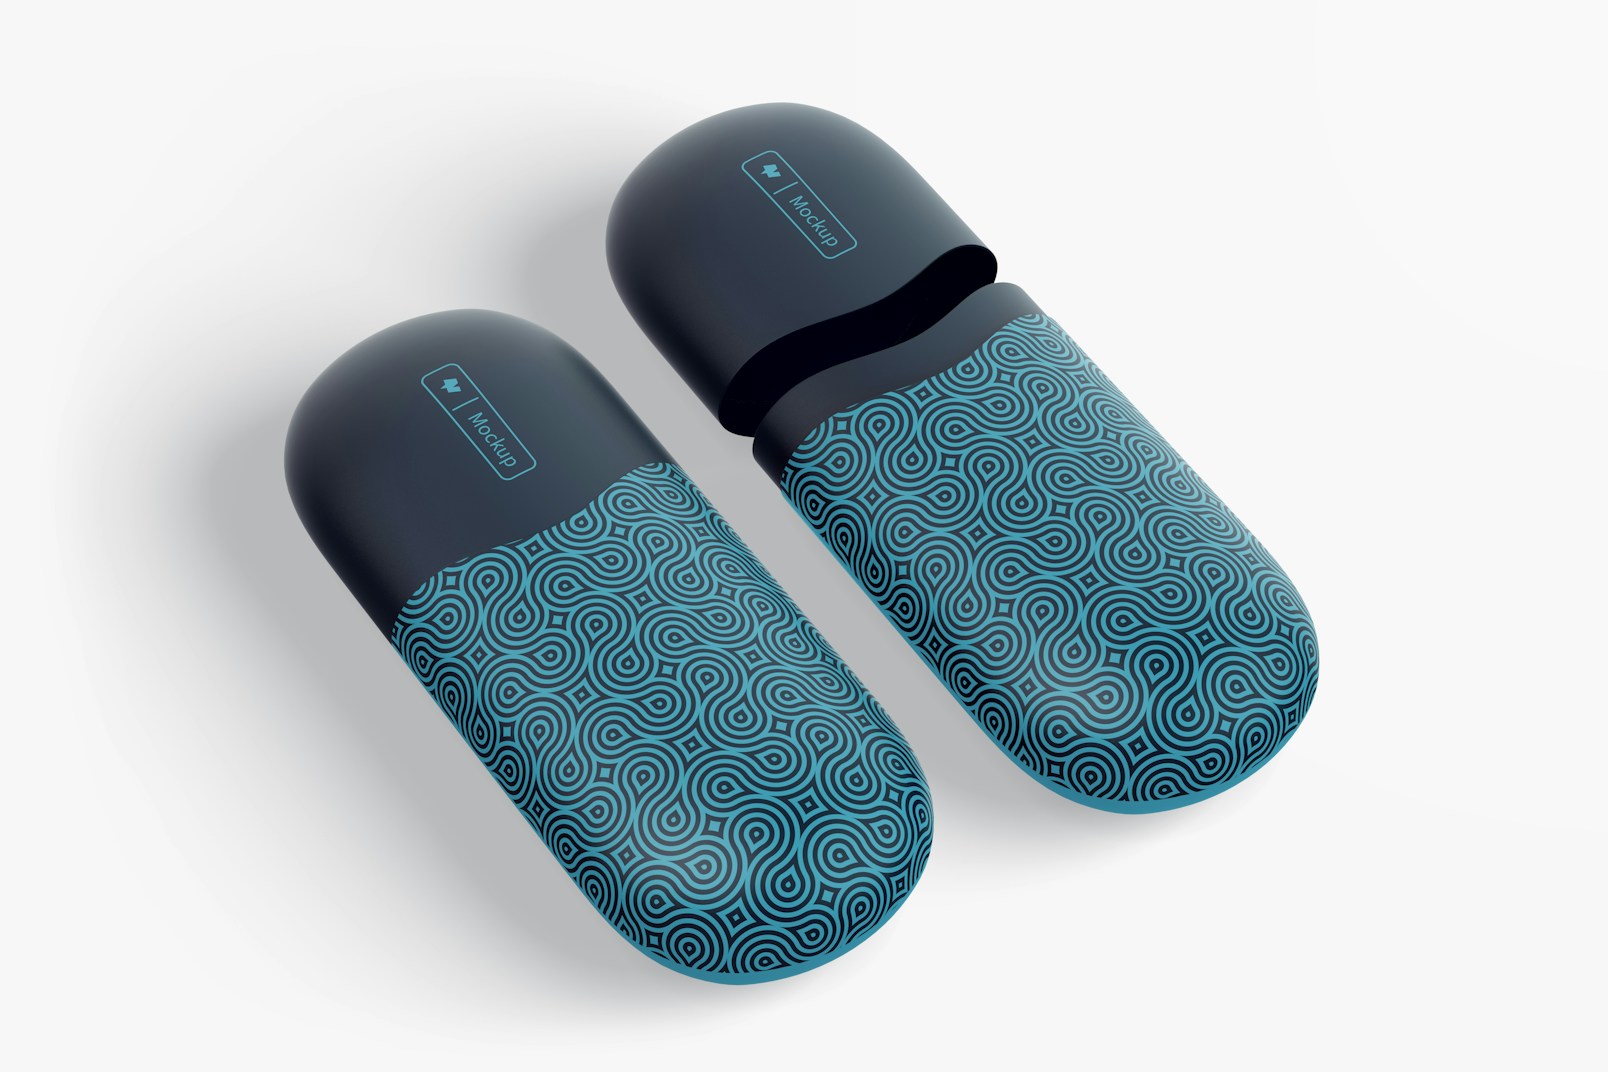 Plastic Eyeglasses Cases Mockup, Closed and Opened